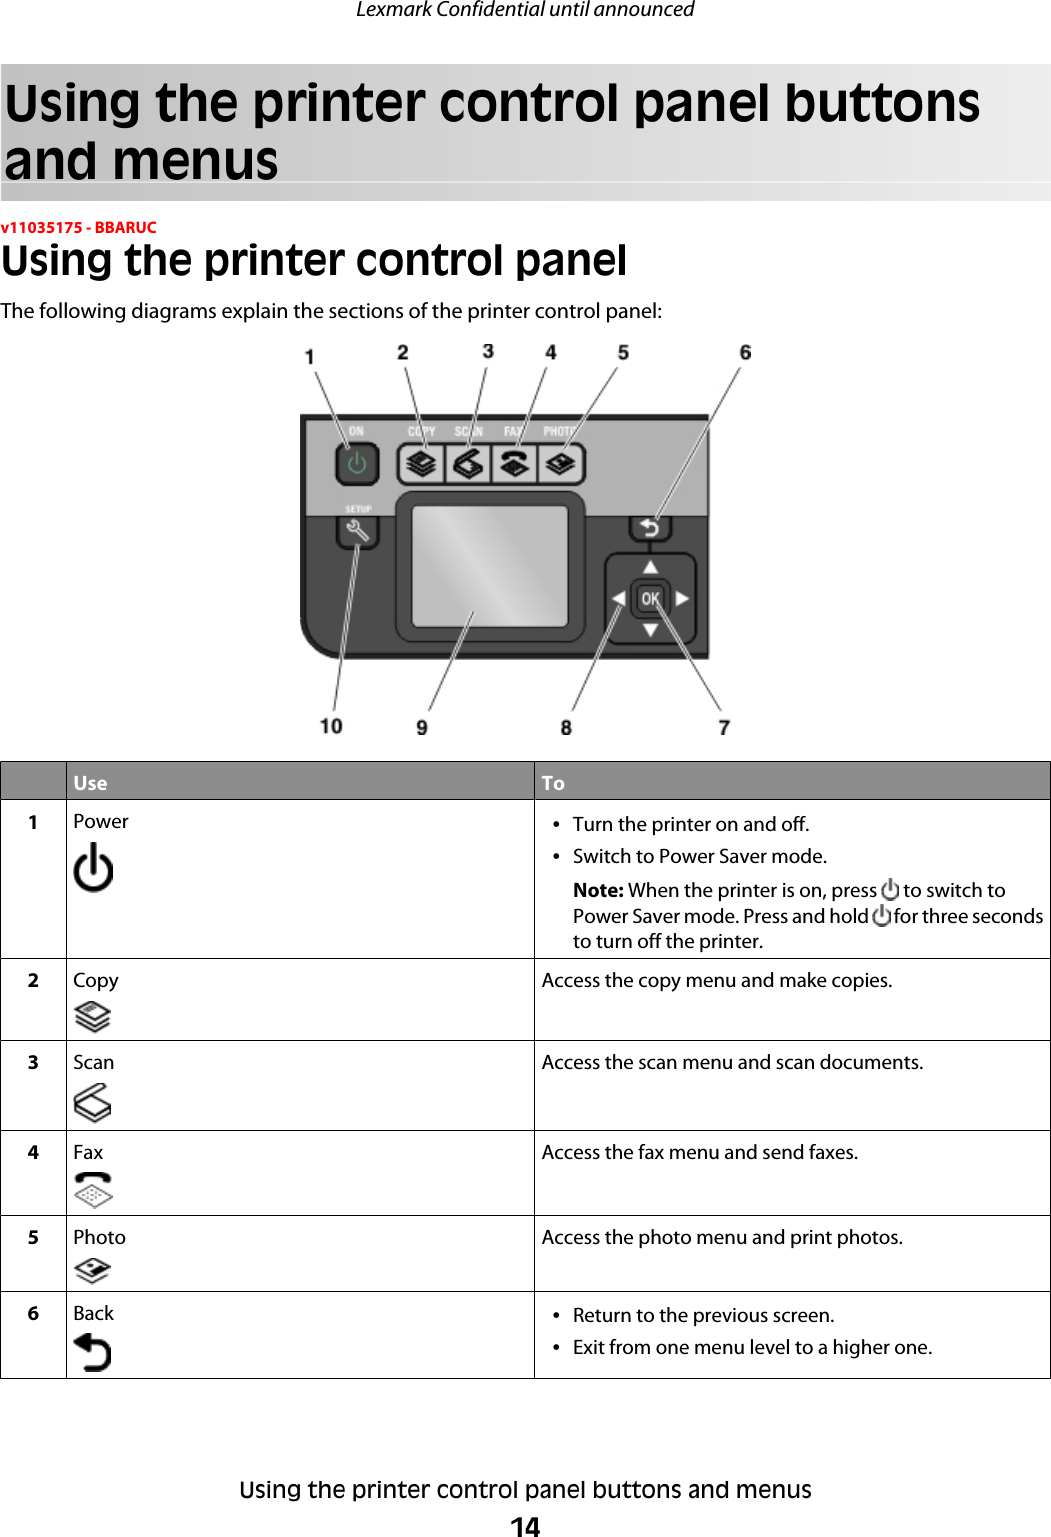 Using the printer control panel buttonsand menusv11035175 - BBARUCUsing the printer control panelThe following diagrams explain the sections of the printer control panel:Use To1Power •Turn the printer on and off.•Switch to Power Saver mode.Note: When the printer is on, press   to switch toPower Saver mode. Press and hold   for three secondsto turn off the printer.2Copy Access the copy menu and make copies.3Scan Access the scan menu and scan documents.4Fax Access the fax menu and send faxes.5Photo Access the photo menu and print photos.6Back •Return to the previous screen.•Exit from one menu level to a higher one.Lexmark Confidential until announcedUsing the printer control panel buttons and menus14